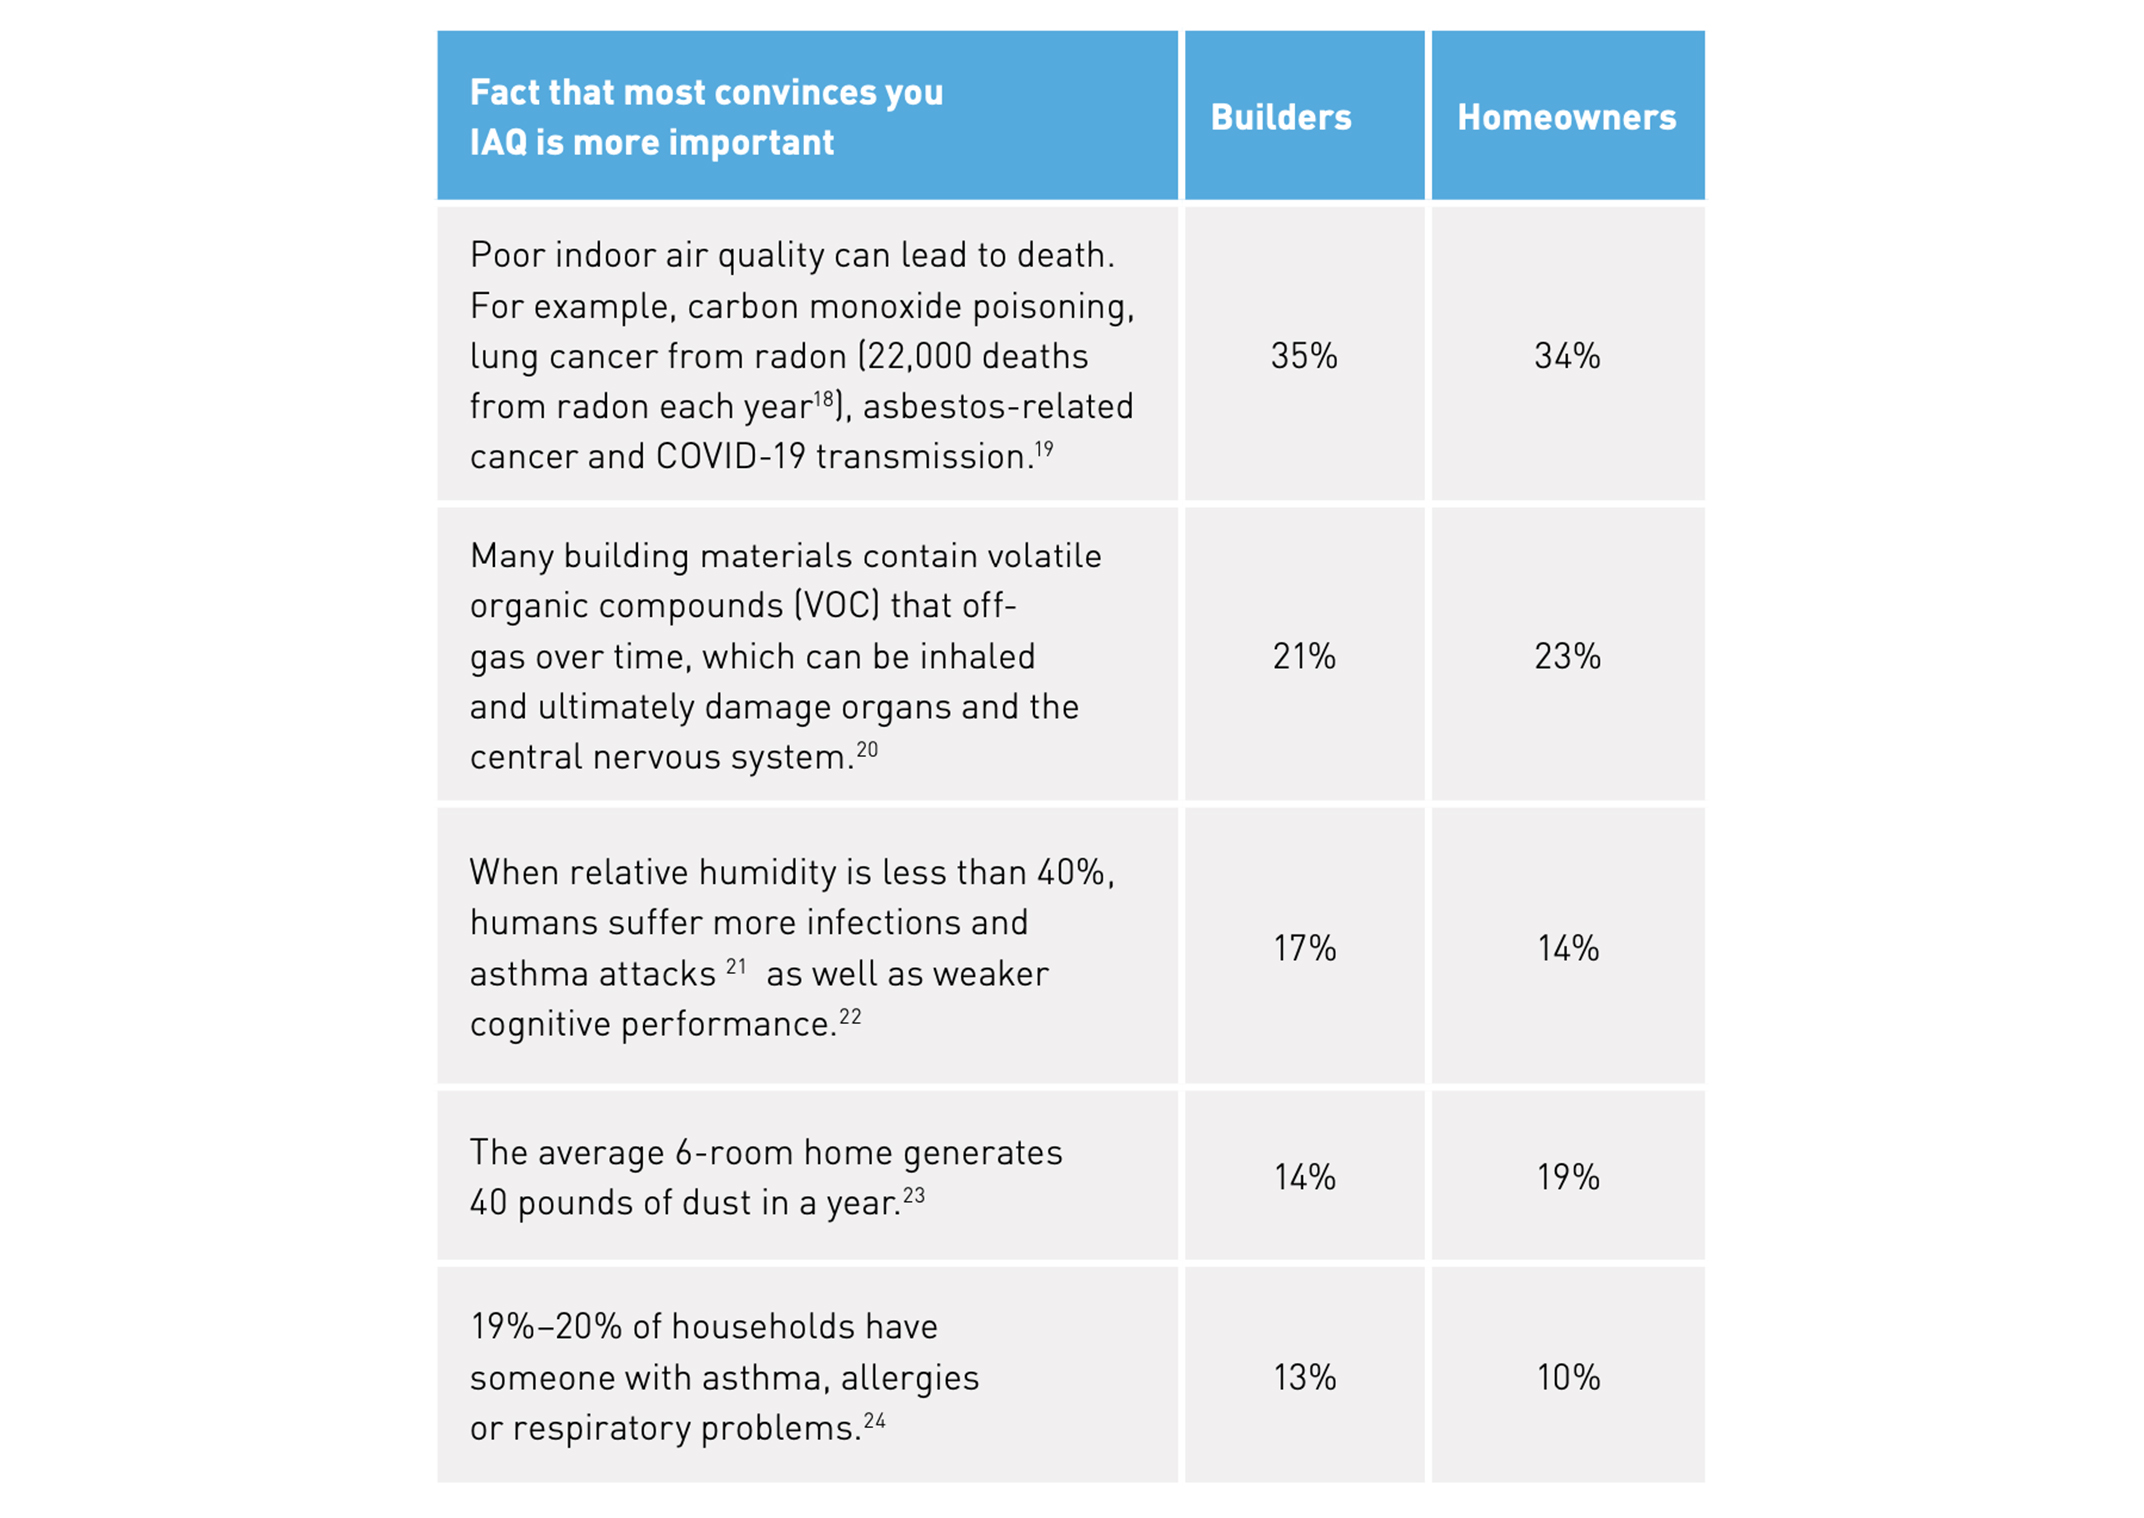 Panasonic indoor air quality facts that convince survey respondents of IAQ importance